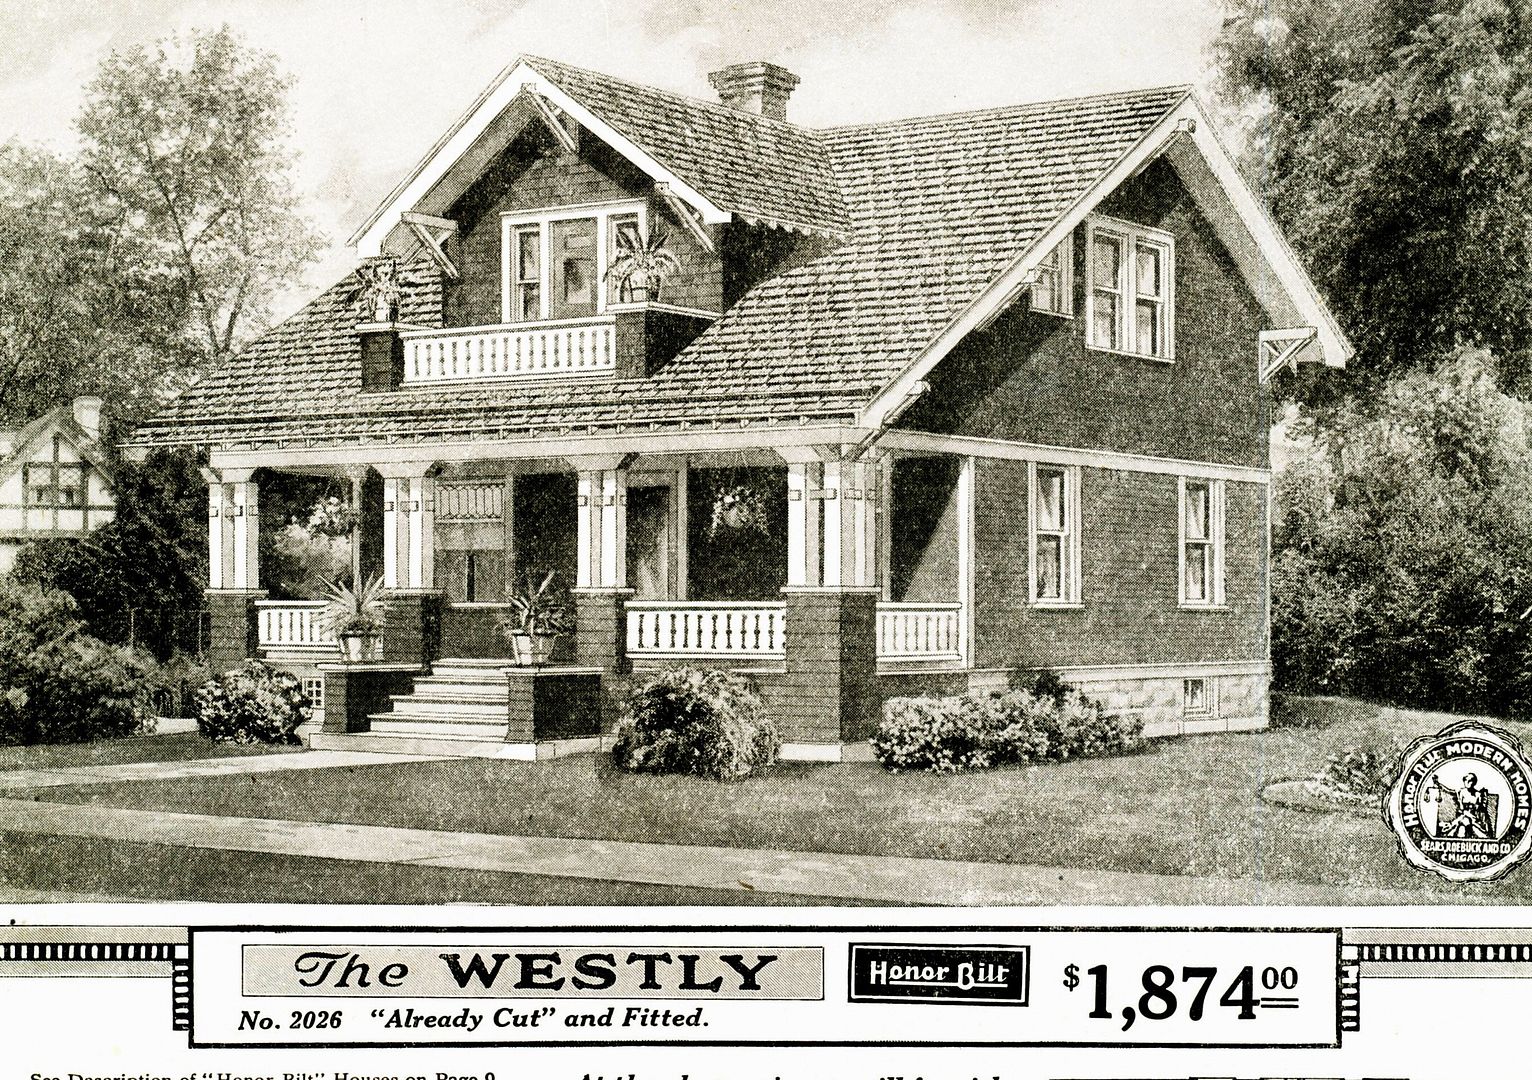 Another wonderful Sears House: The Westly (1919 catalog). 